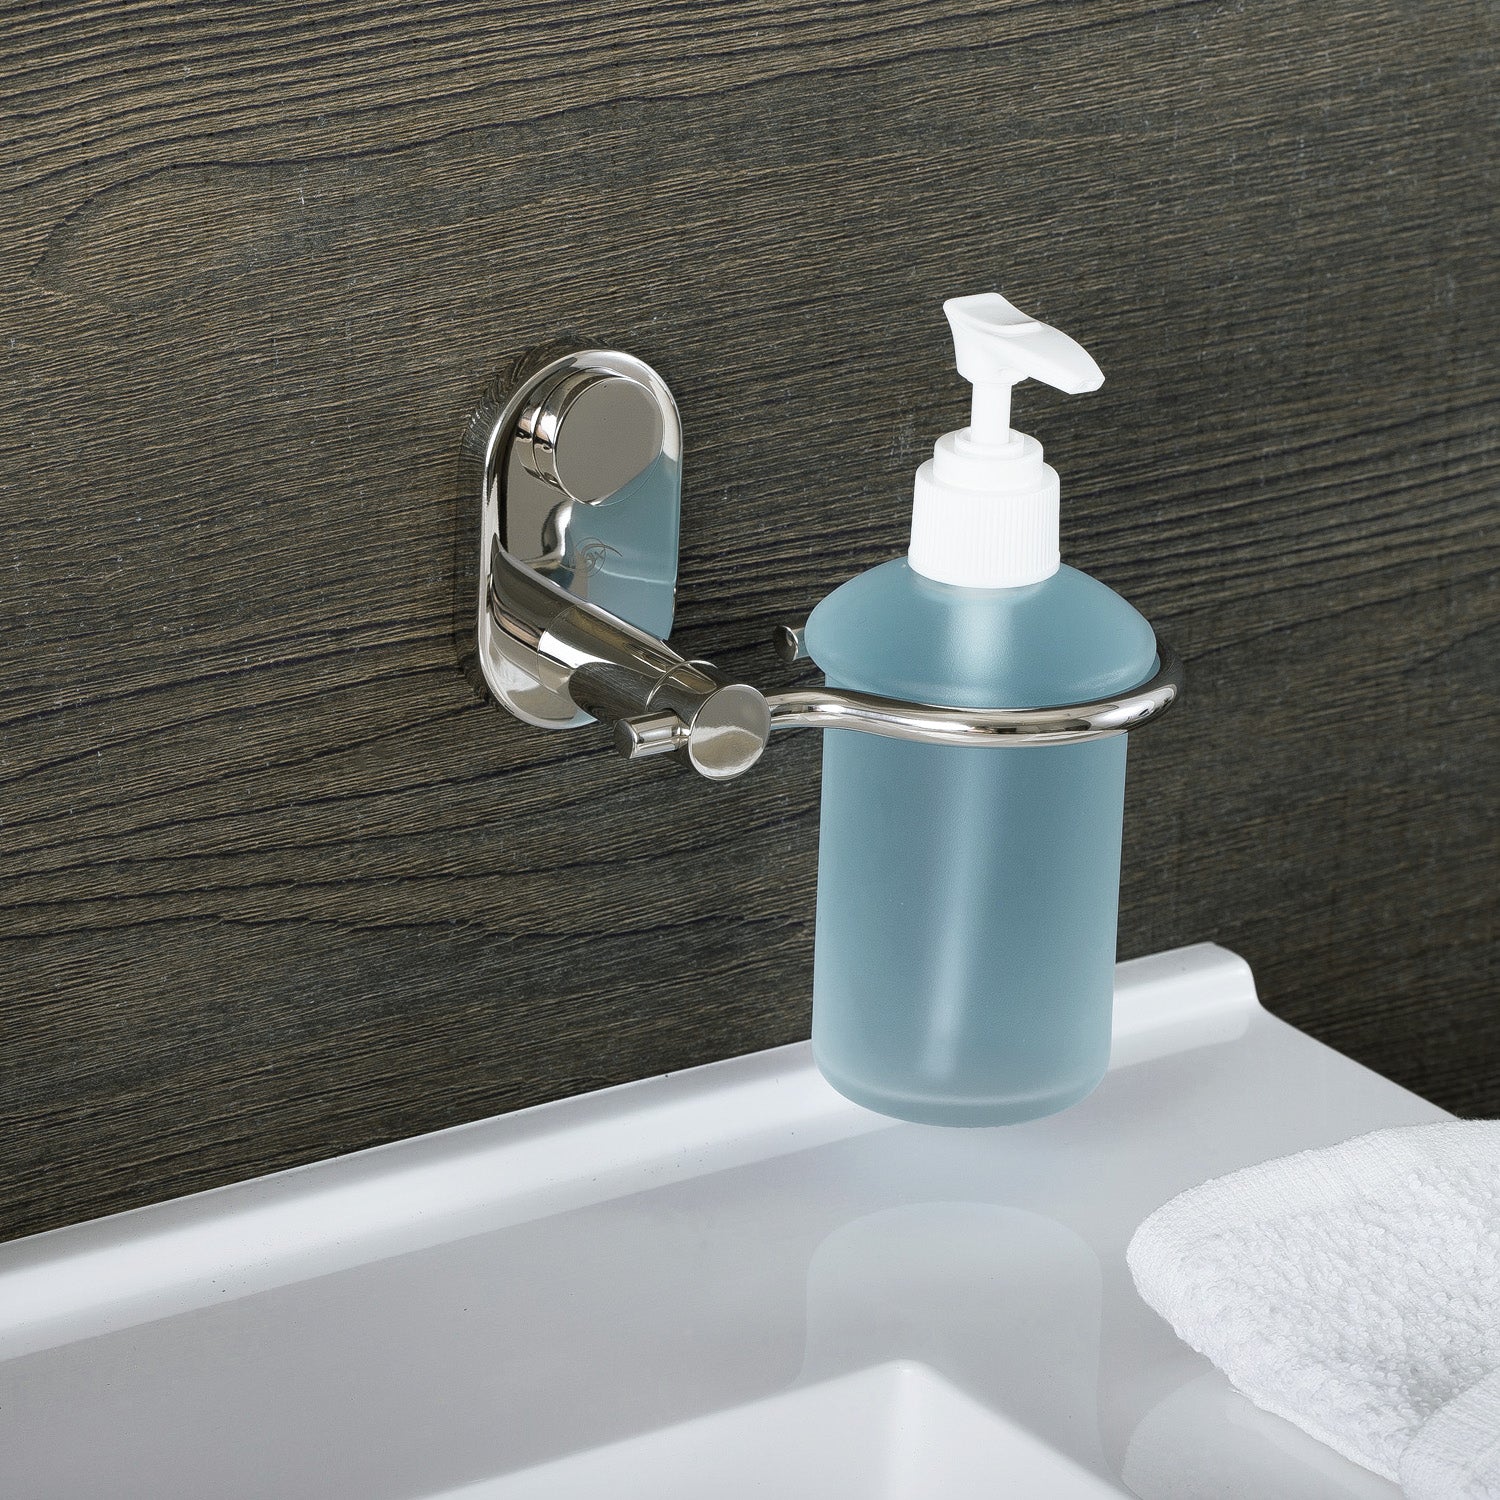 DAX Stainless Steel Soap Dispenser with Glass Bottle, Wall Mount, Satin Finish, 6-1/2 x 4-1/8 x 4-15/16 Inches (DAX-G0213-S)